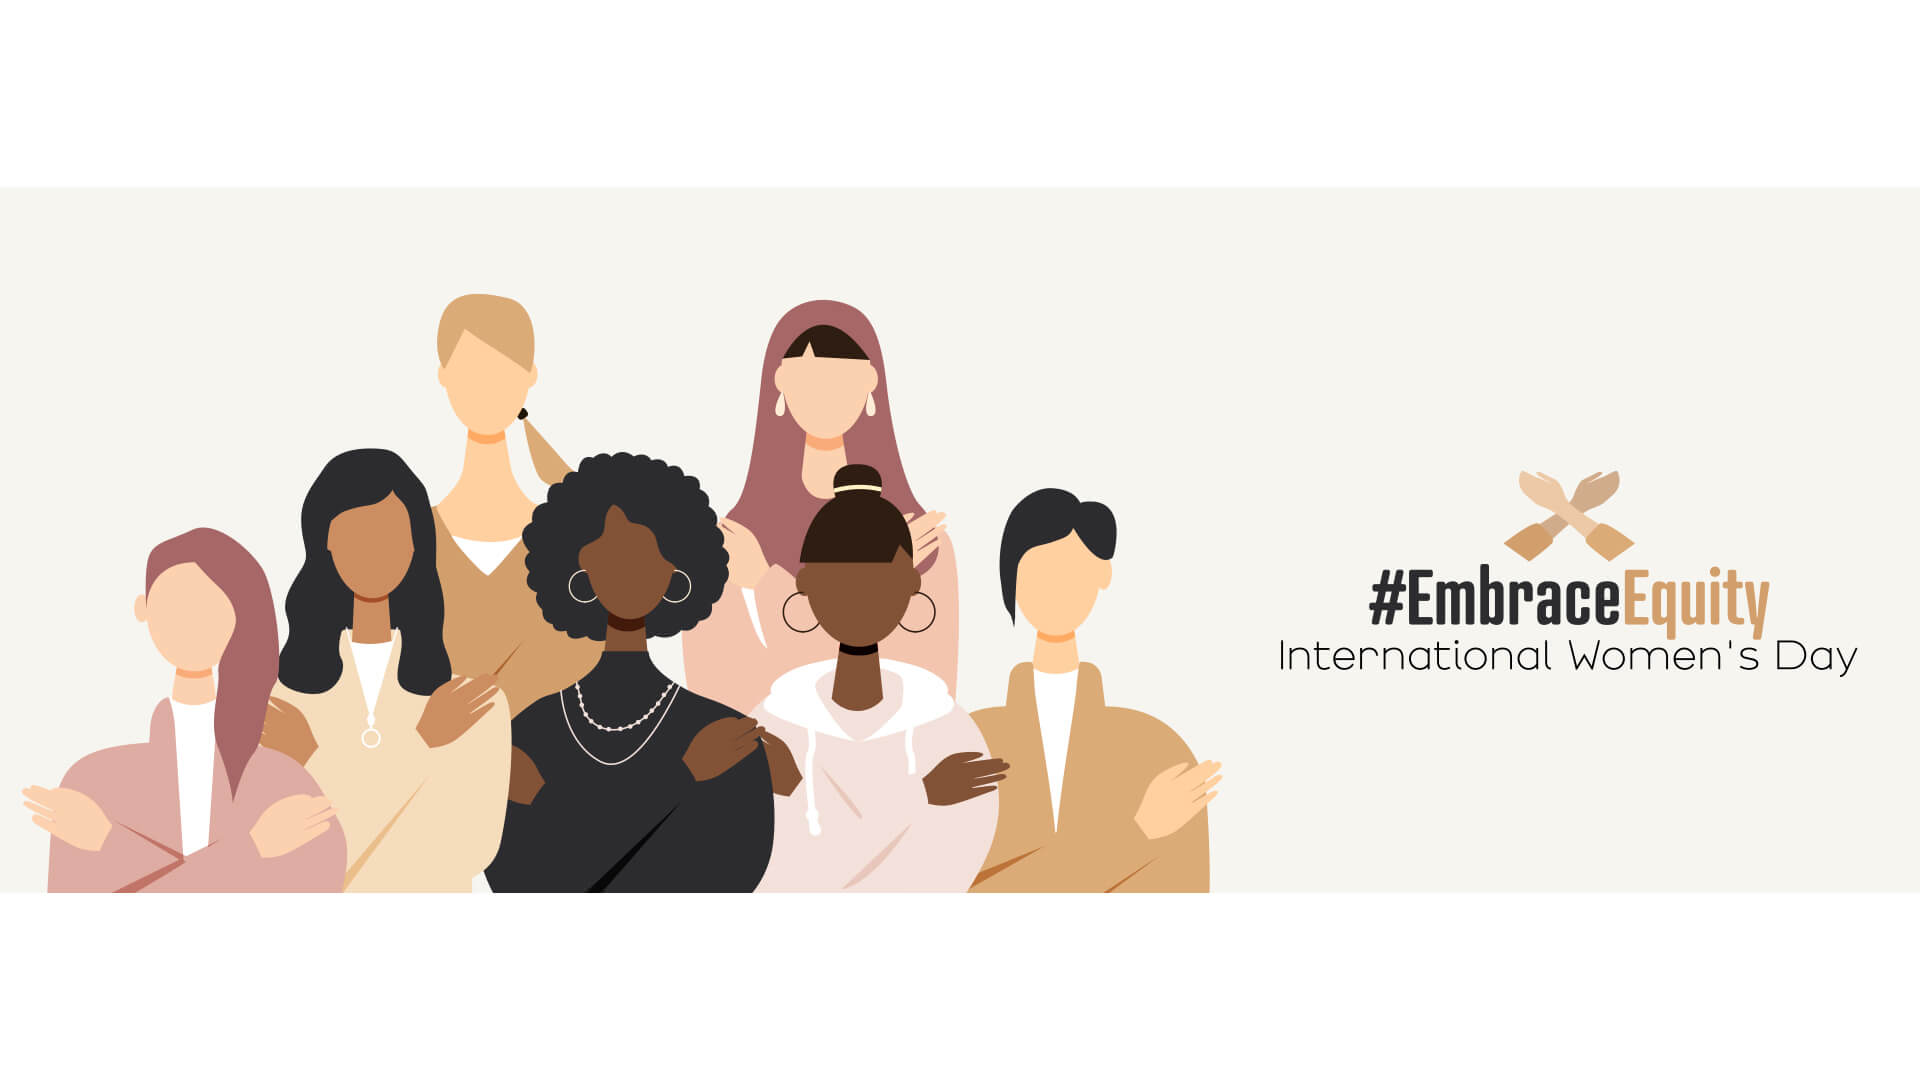 Embracing Equity this International Women’s Day